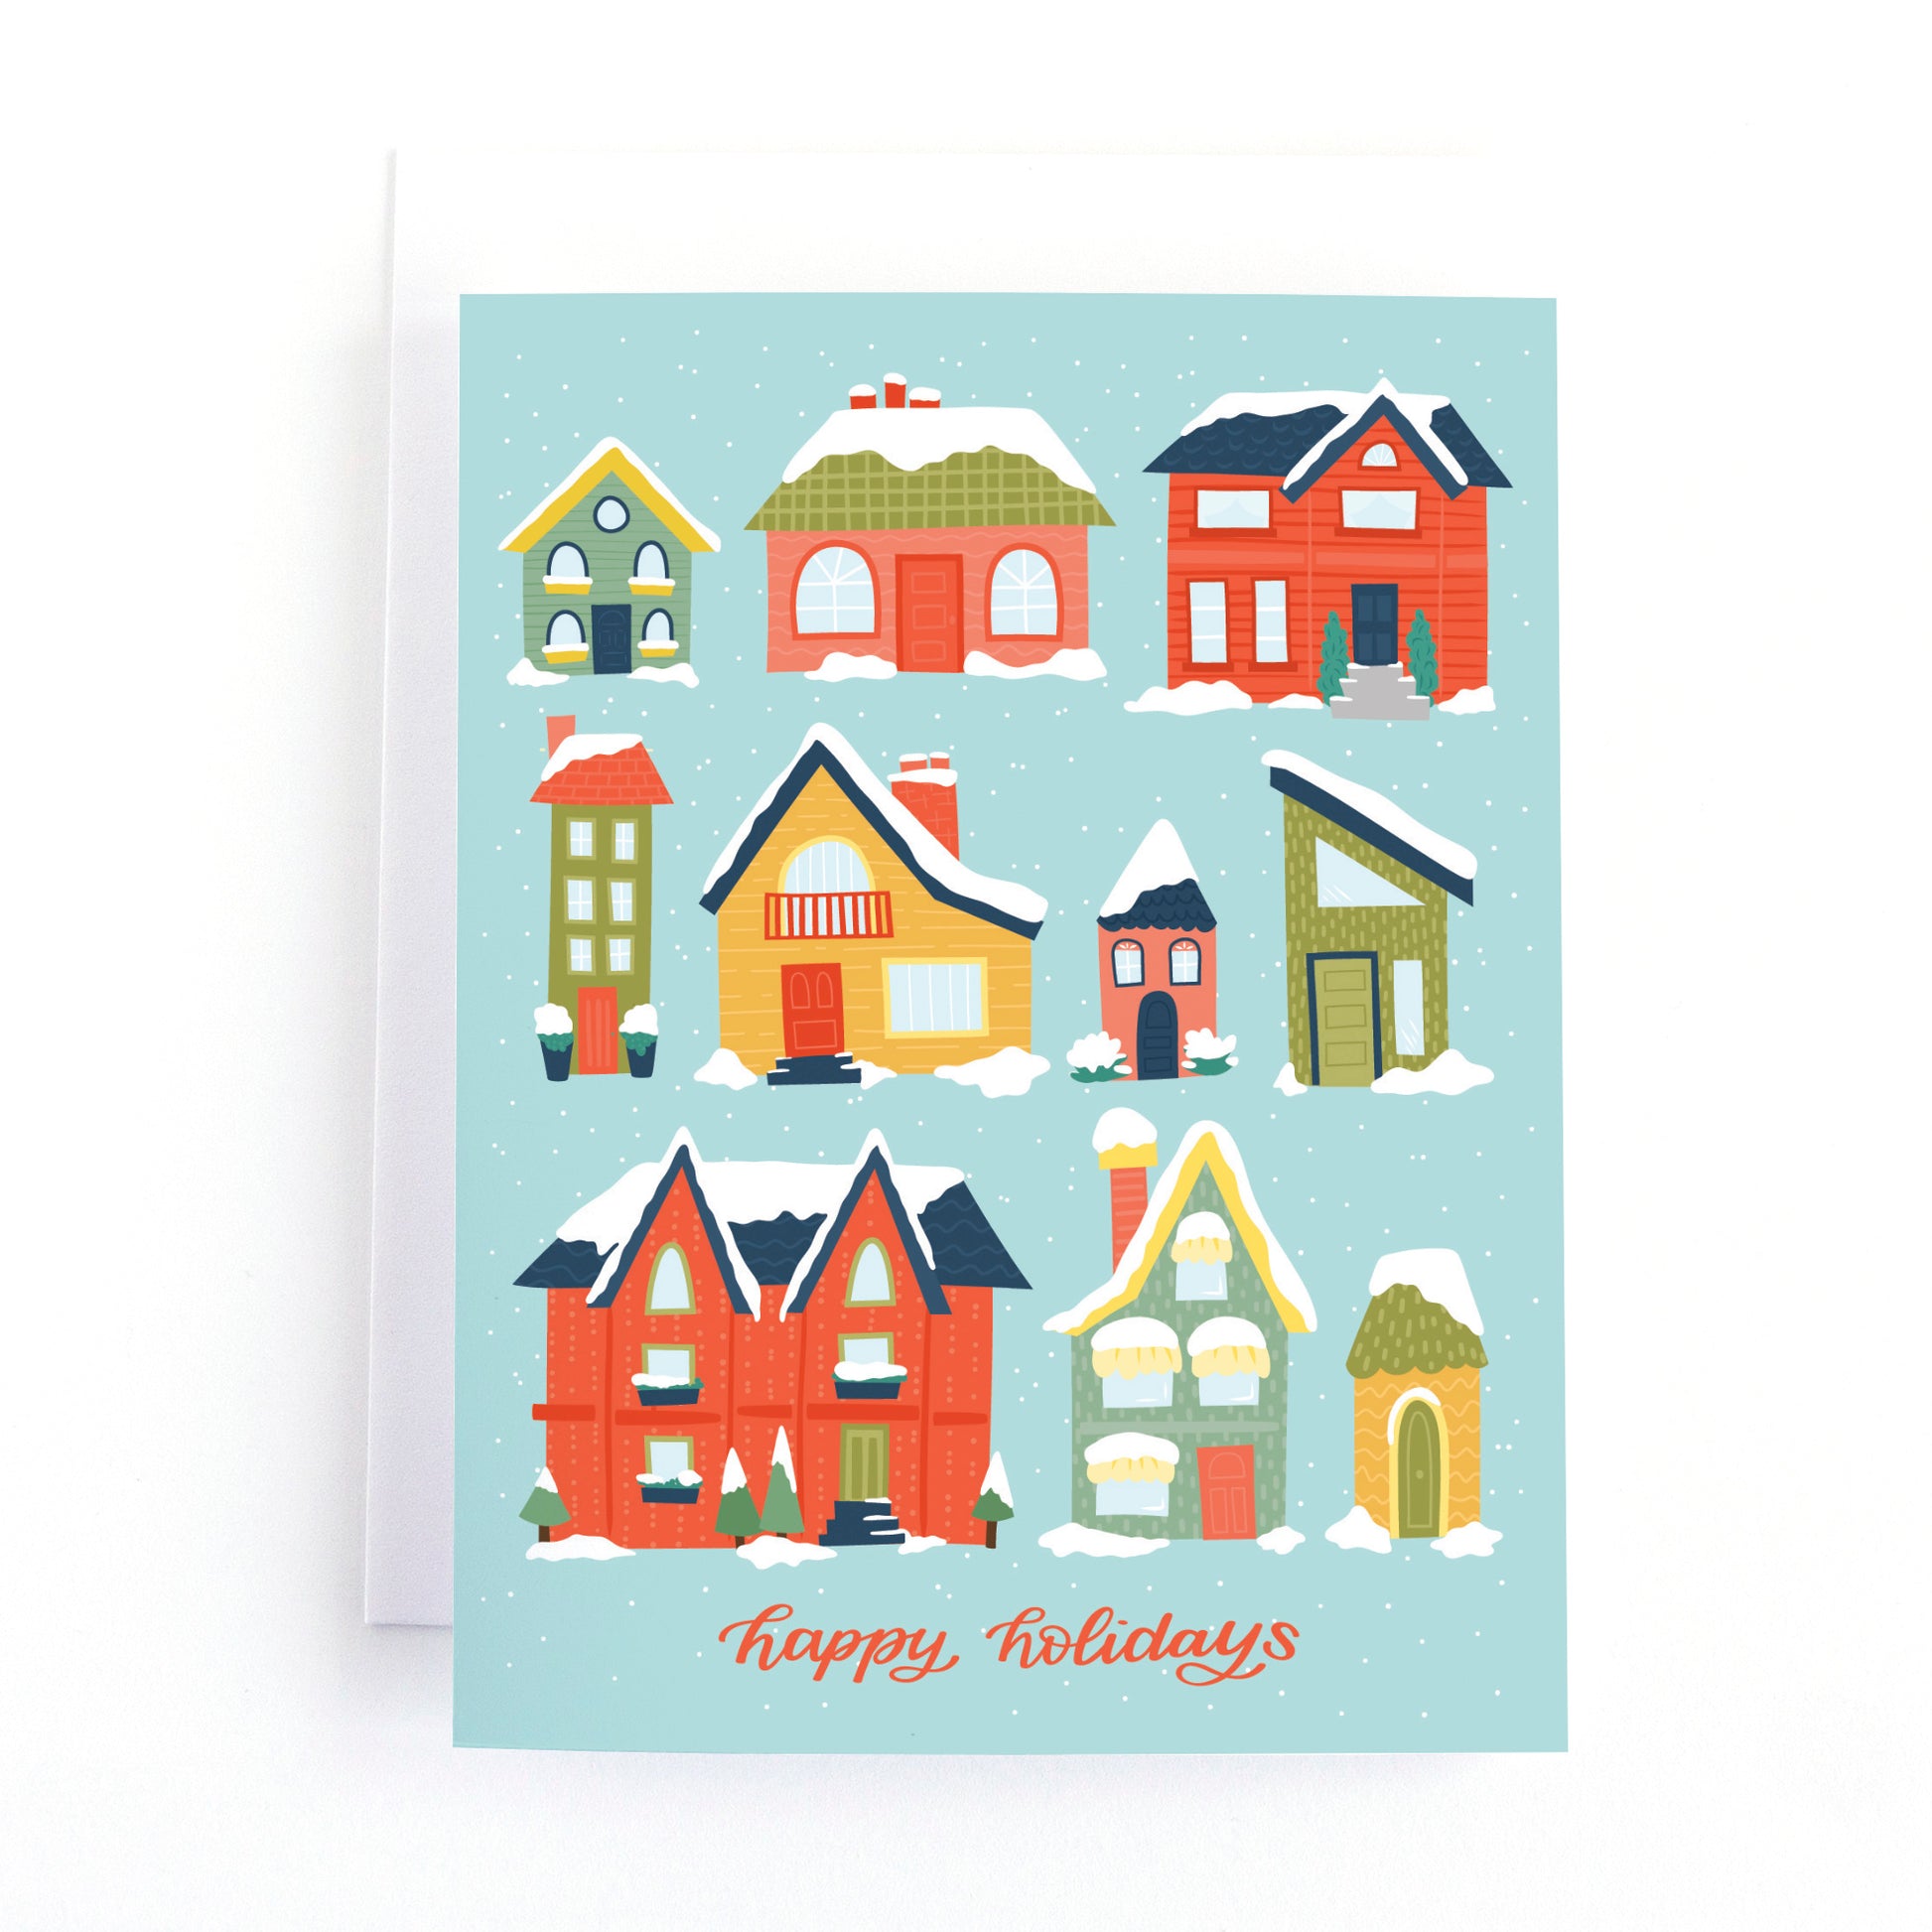 Christmas Holidays card with cute houses in a snowy scene with the greeting Happy holidays